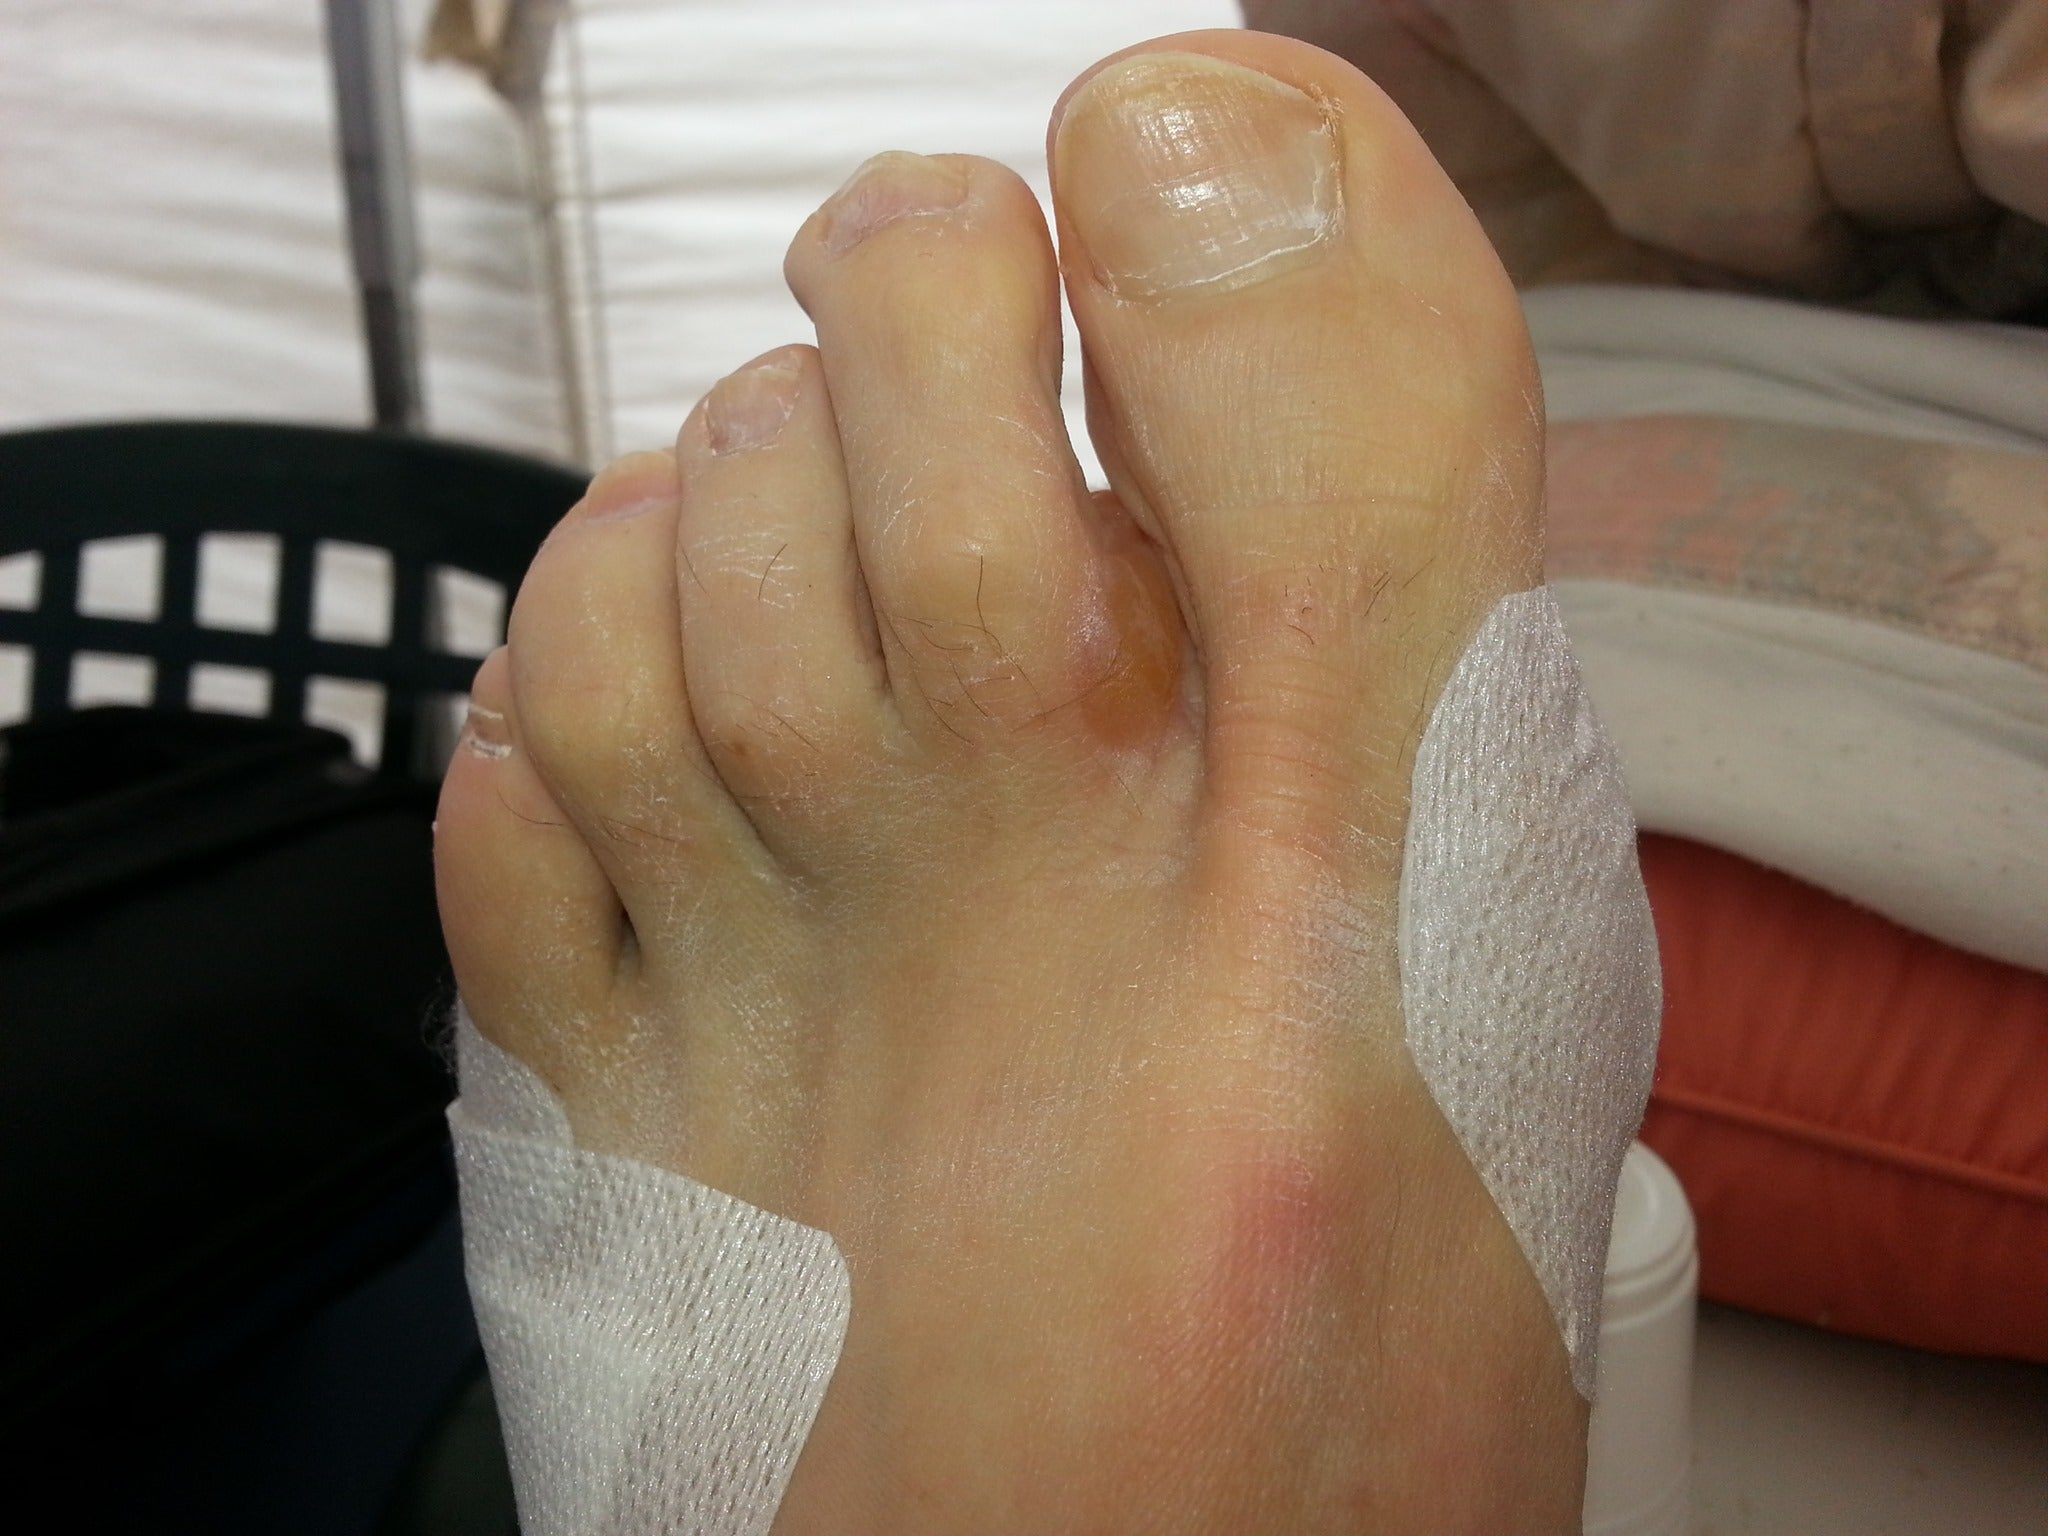 See the blister appearing between the toes